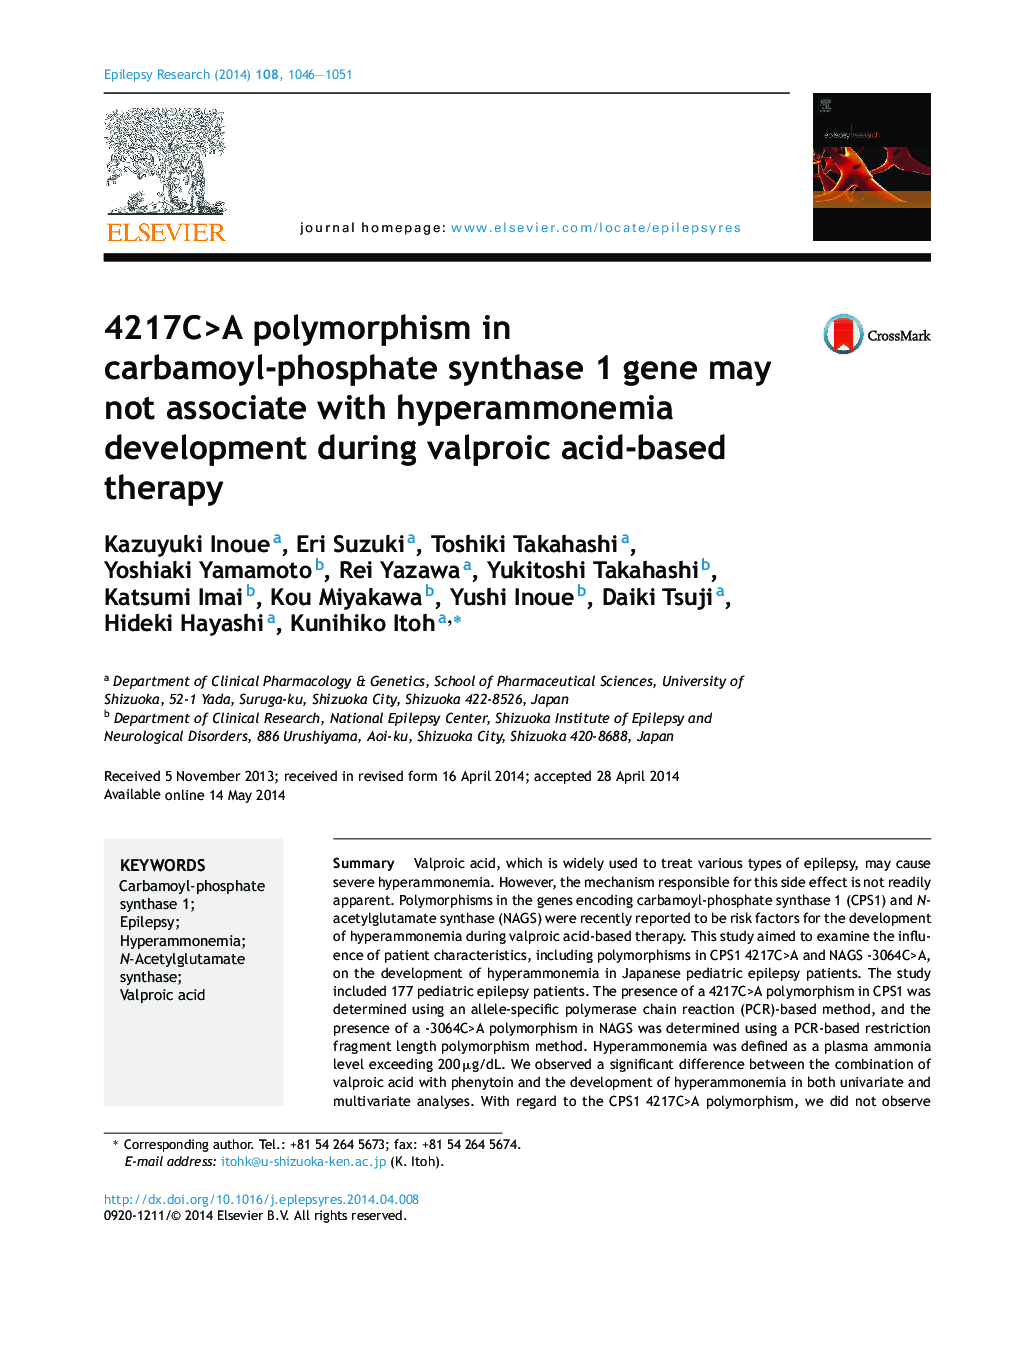 4217C>A polymorphism in carbamoyl-phosphate synthase 1 gene may not associate with hyperammonemia development during valproic acid-based therapy